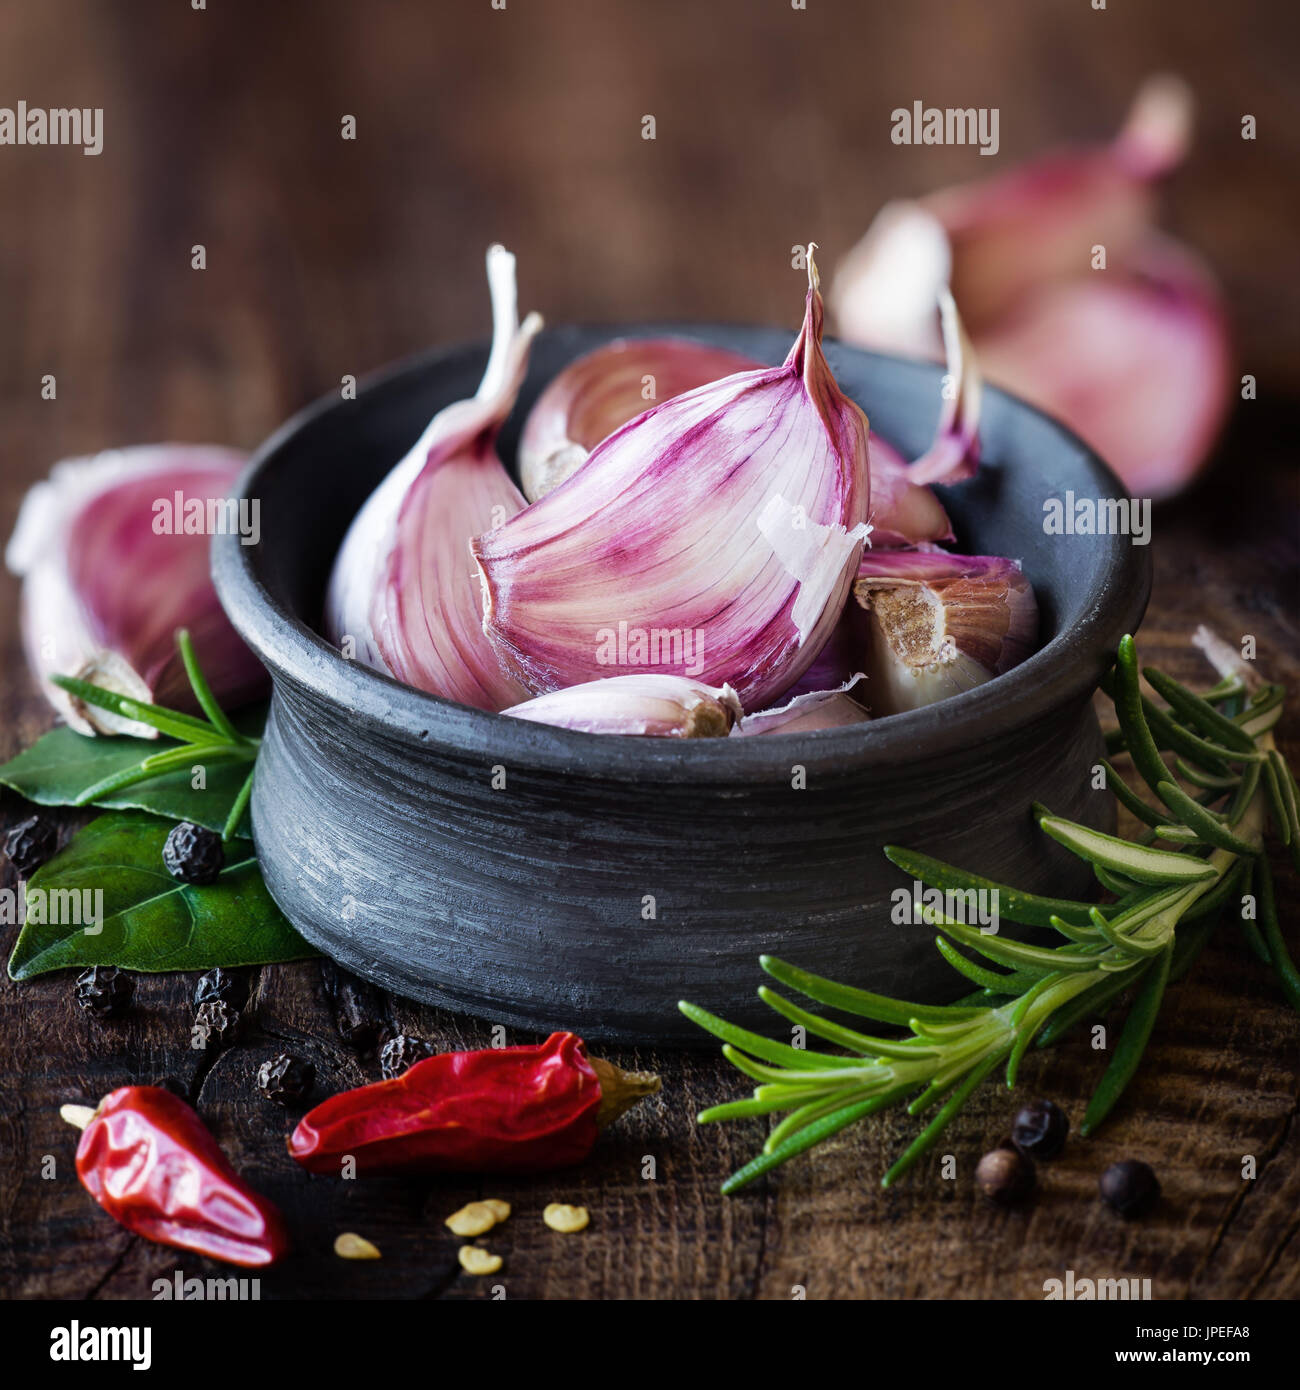 Cloves of purple carlic in a black bowl with rosemary, bay leaf, black pepper and chili pepper on dark rustic wooden background. With plenty copy spac Stock Photo